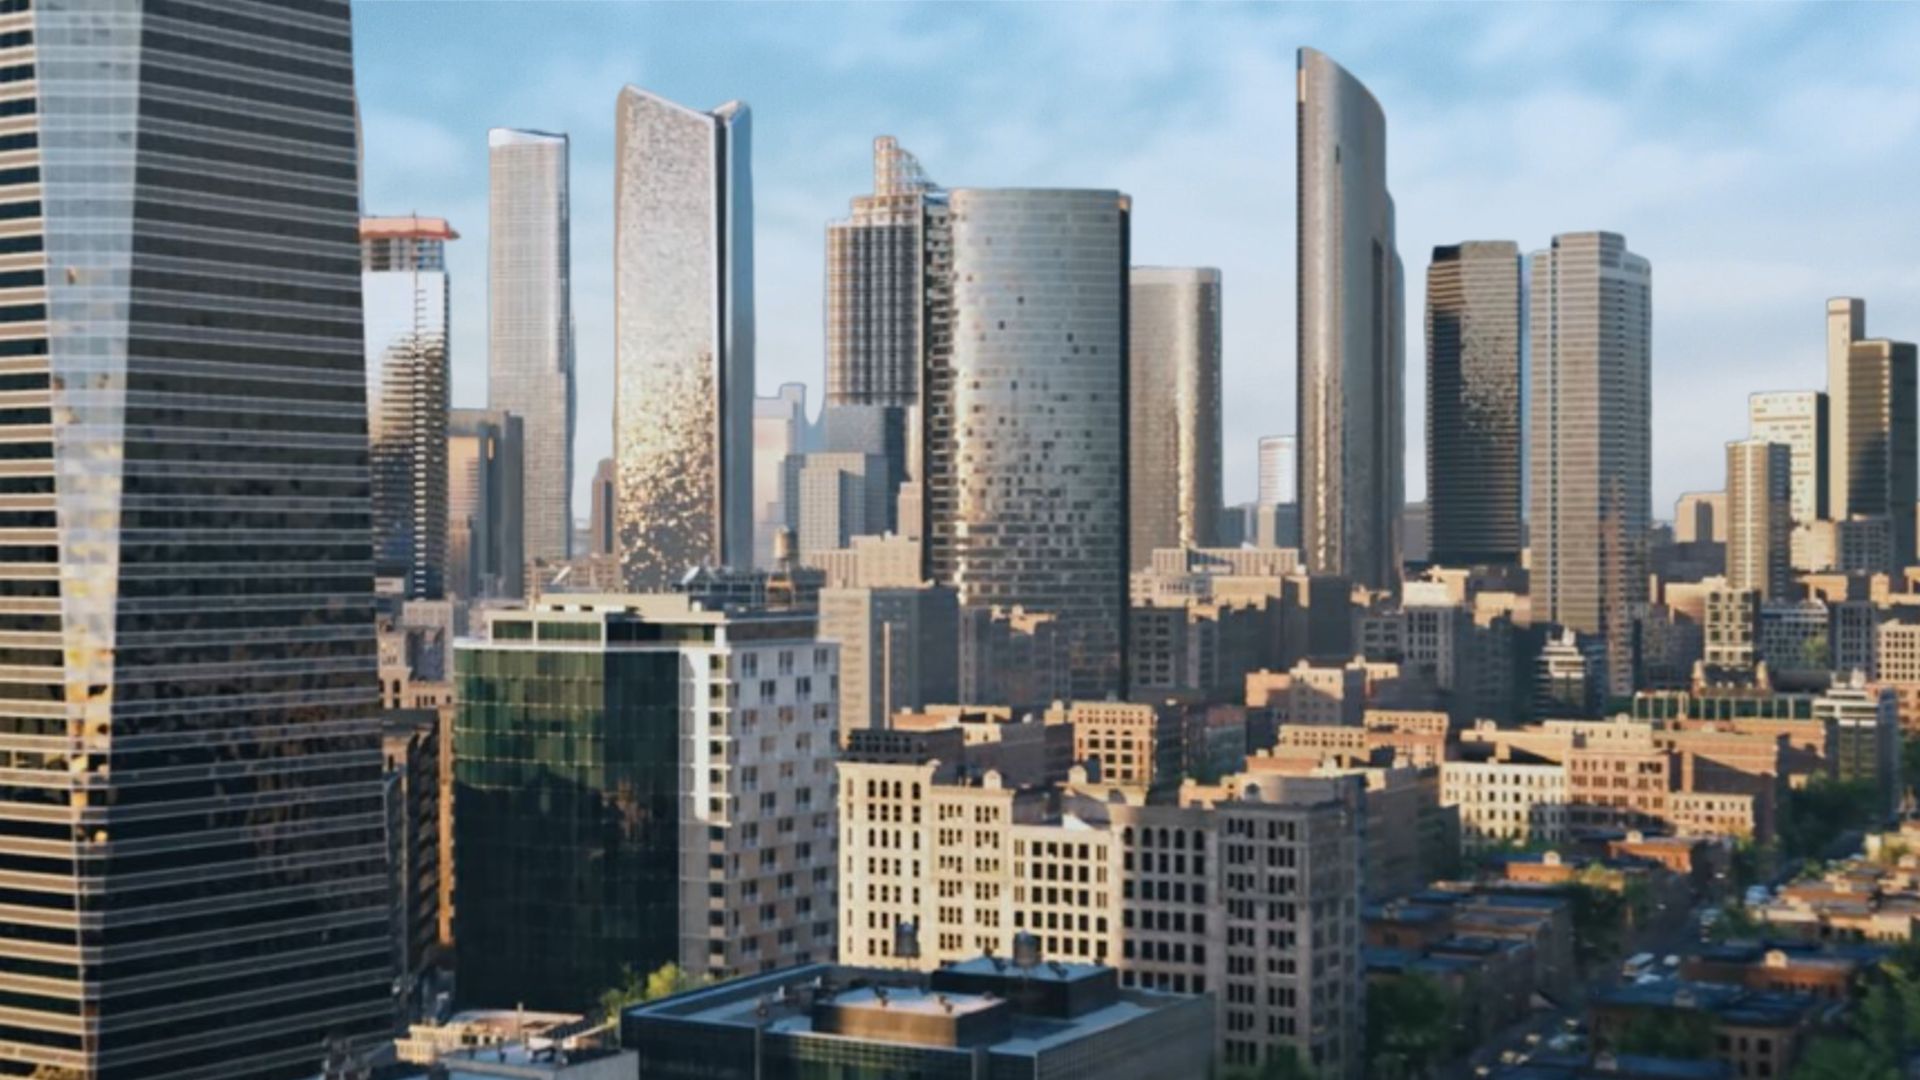 First Cities: Skylines 2 gameplay trailer looks absolutely beautiful